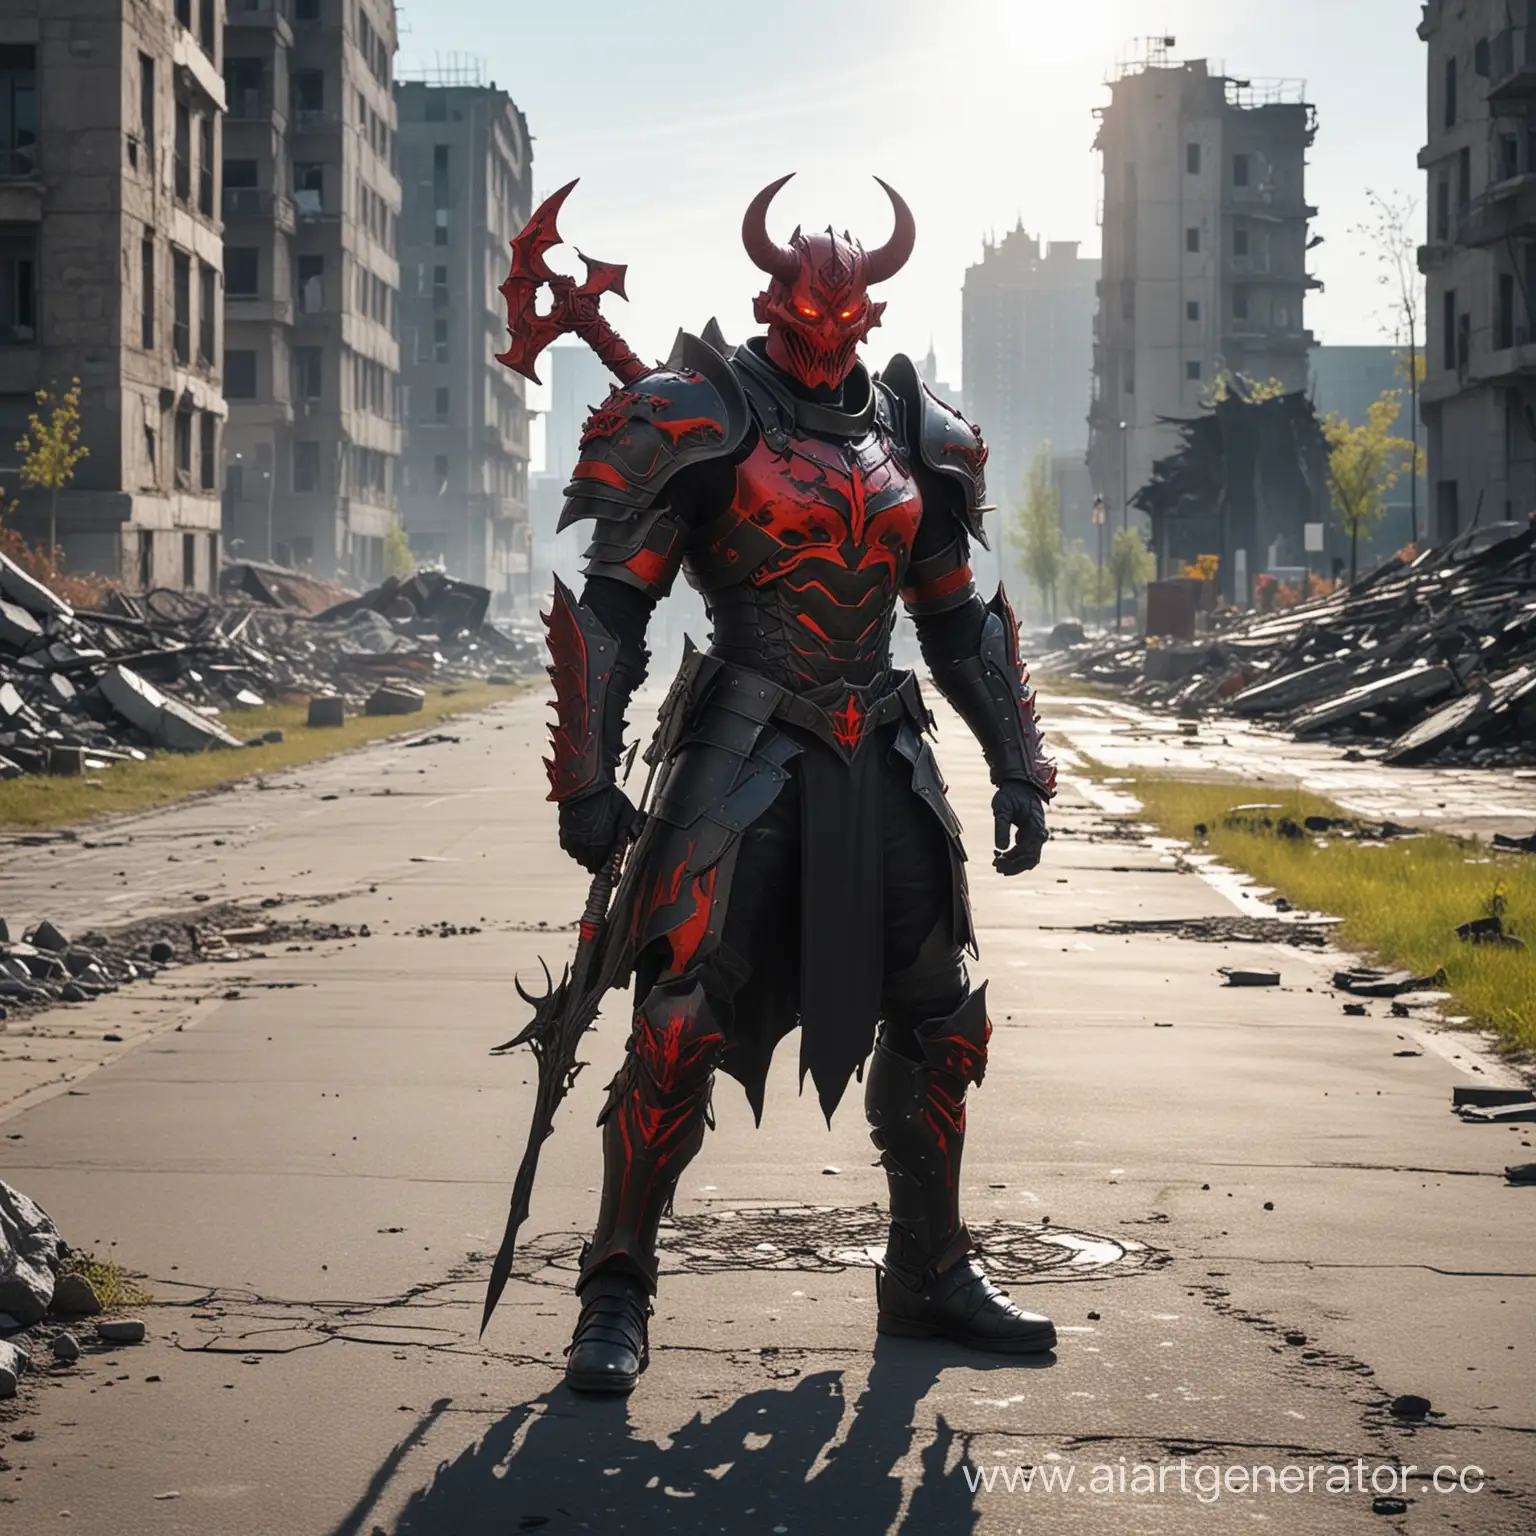 Red-Demon-in-Black-Armor-with-Magical-Staff-Amidst-Ruins-of-Megapolis-on-a-Sunny-Day